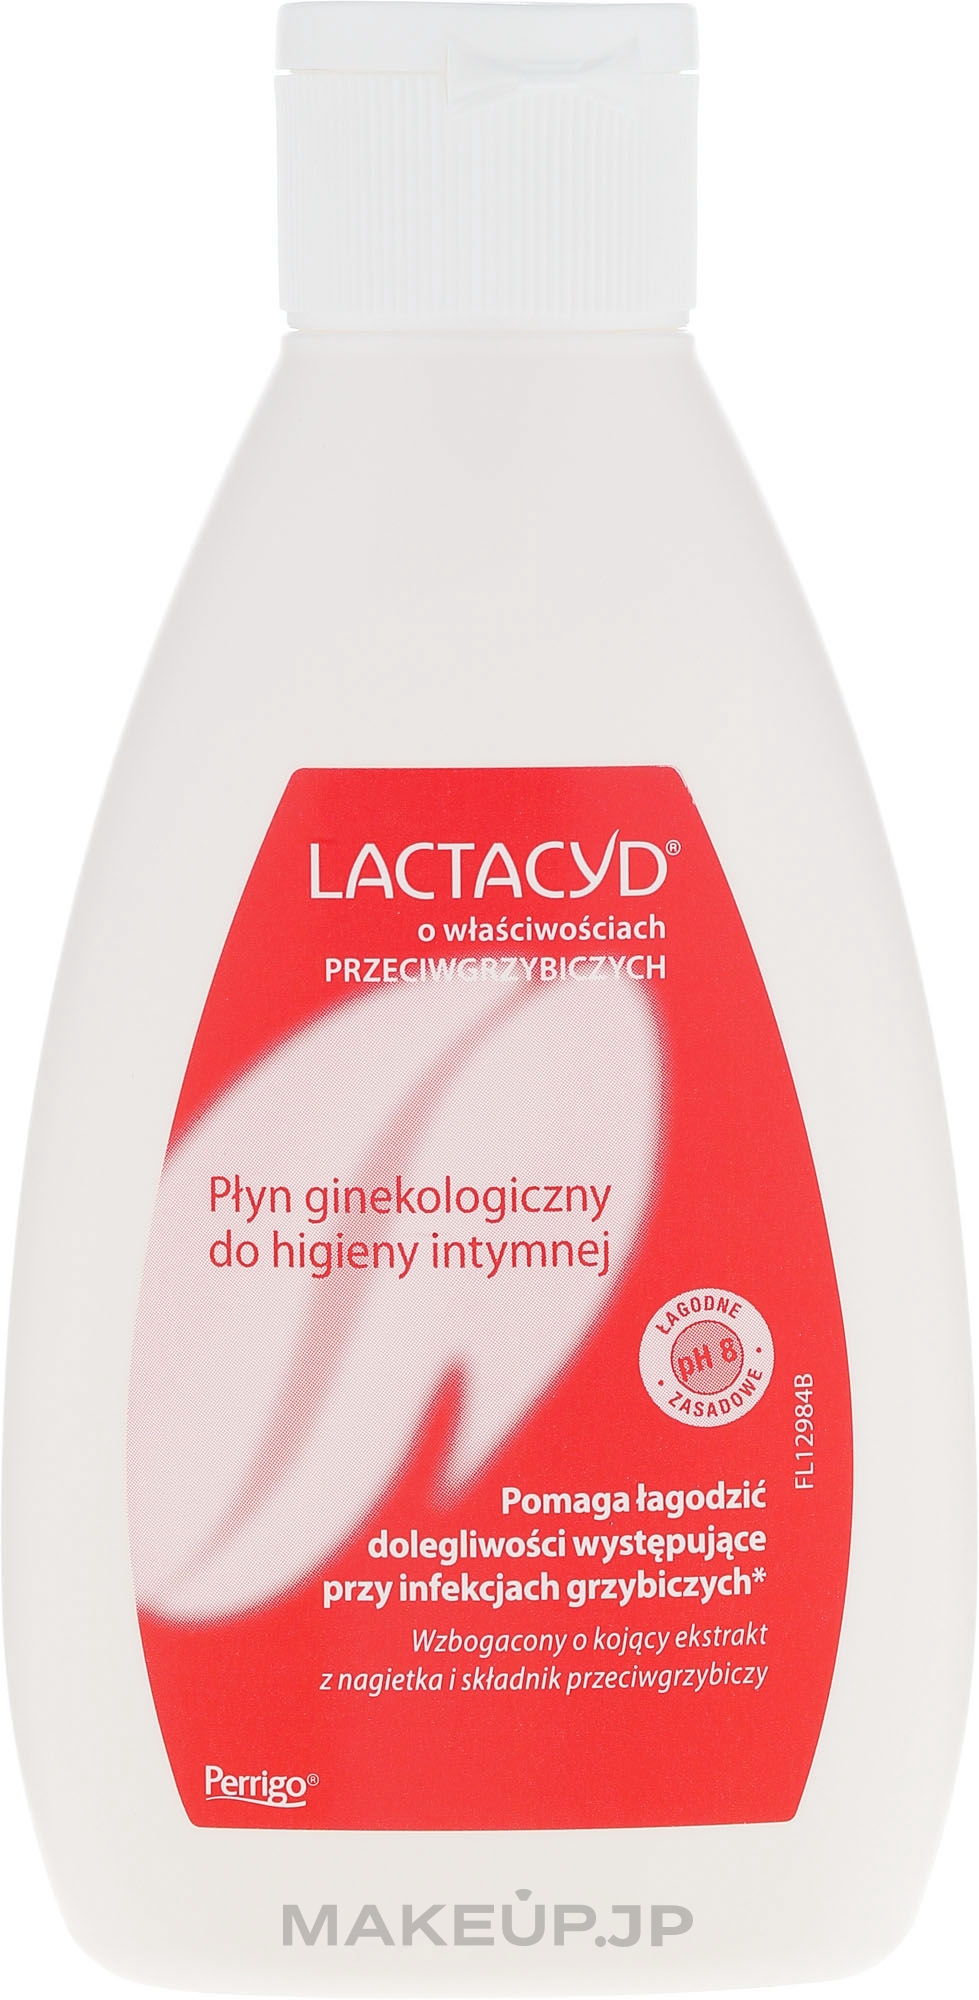 Antifungal Treatment for Intimate Hygiene without Dispenser - Lactacyd  — photo 200 ml